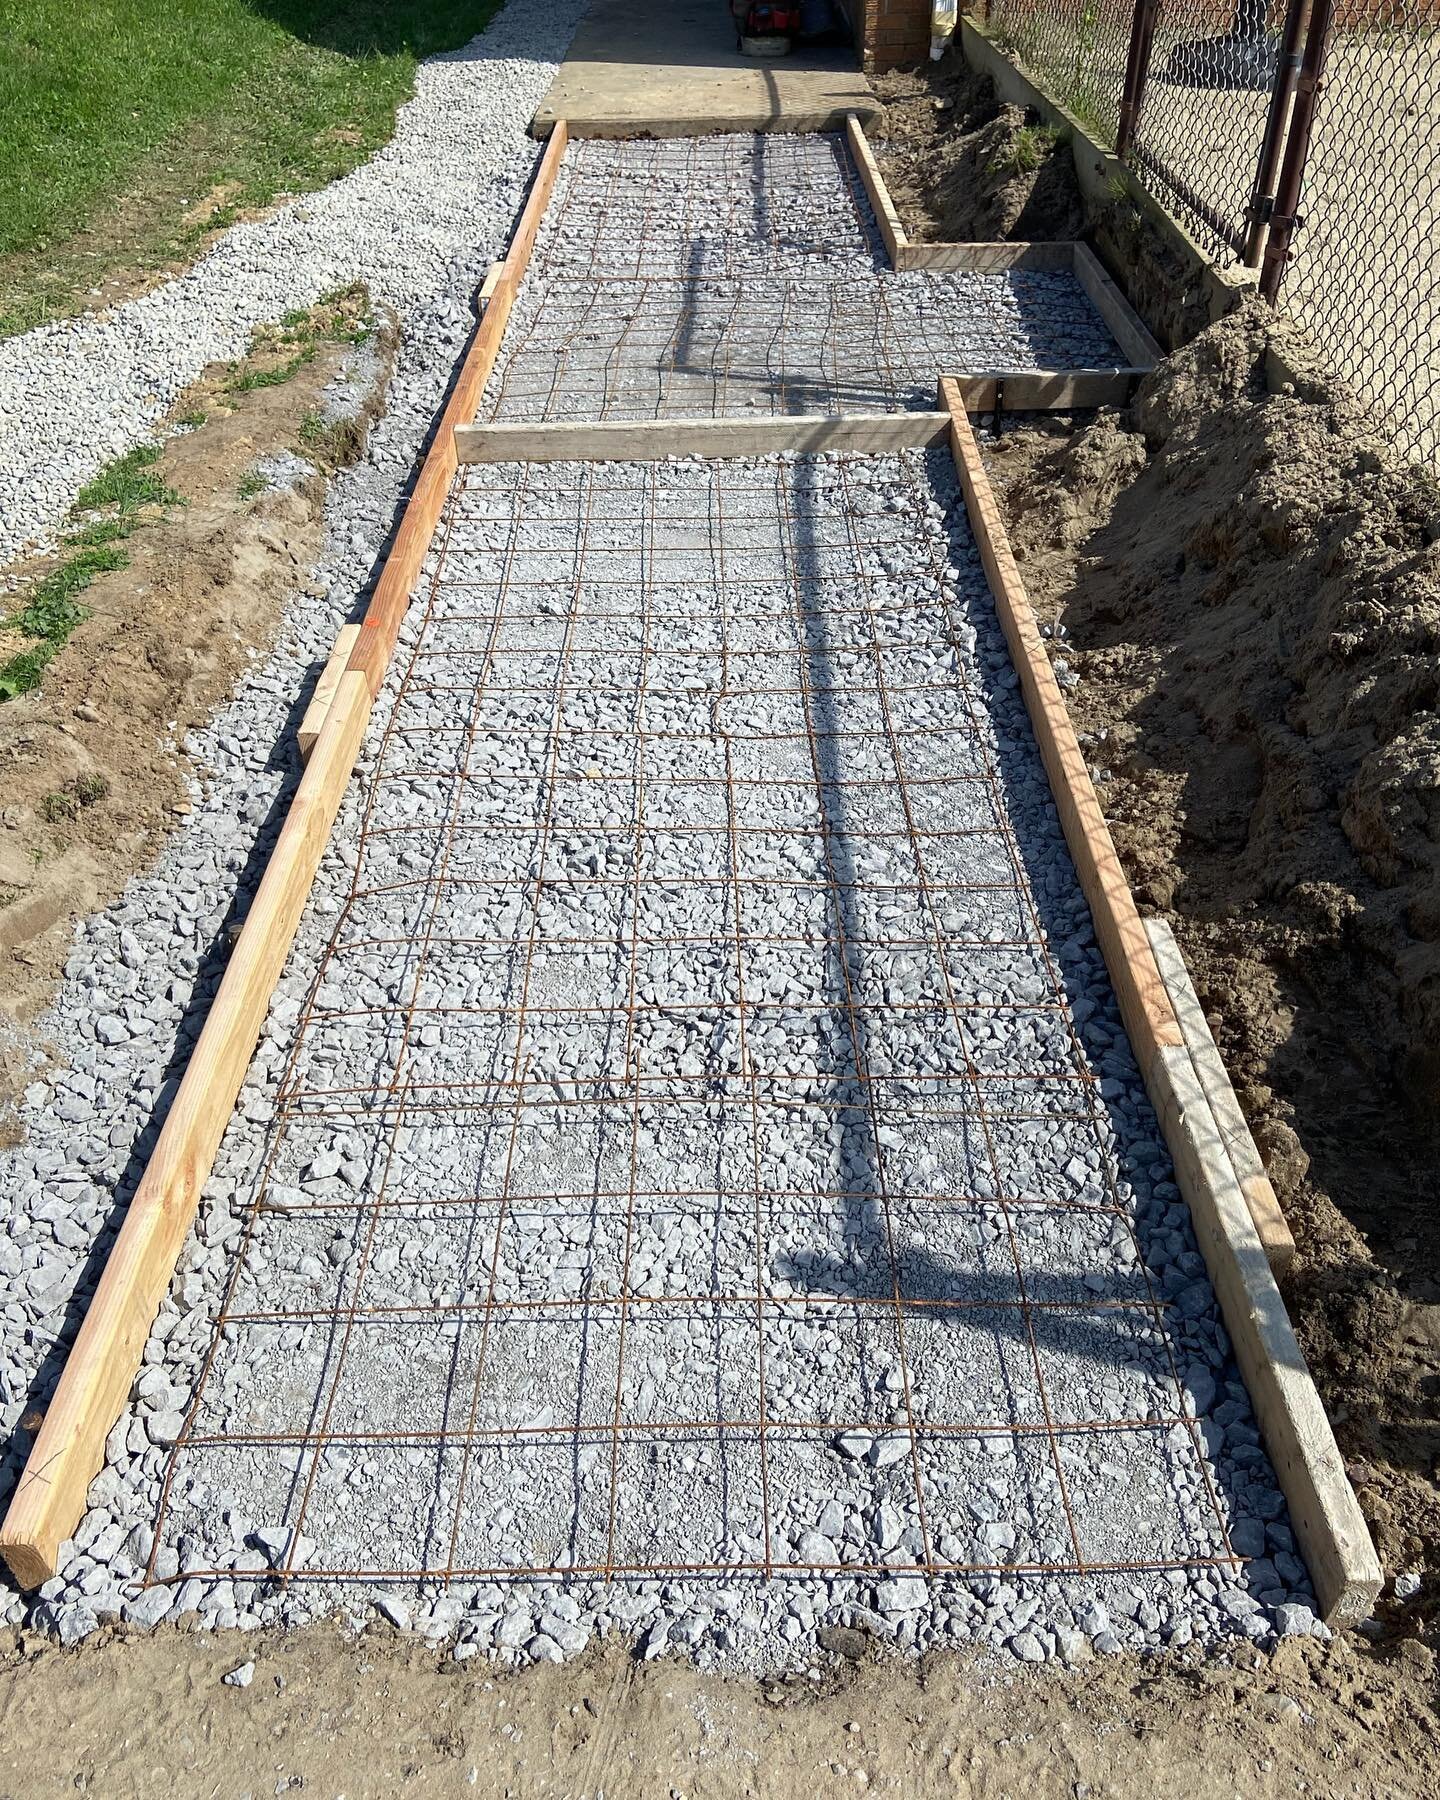 This week we&rsquo;re on site in Mercer County. To improve accessibility, the leaders at Jubilee Daycare &amp; Preschool requested a new walkway for an easier parent drop-off experience. 

The rain has caused a few delays with pouring the concrete, b